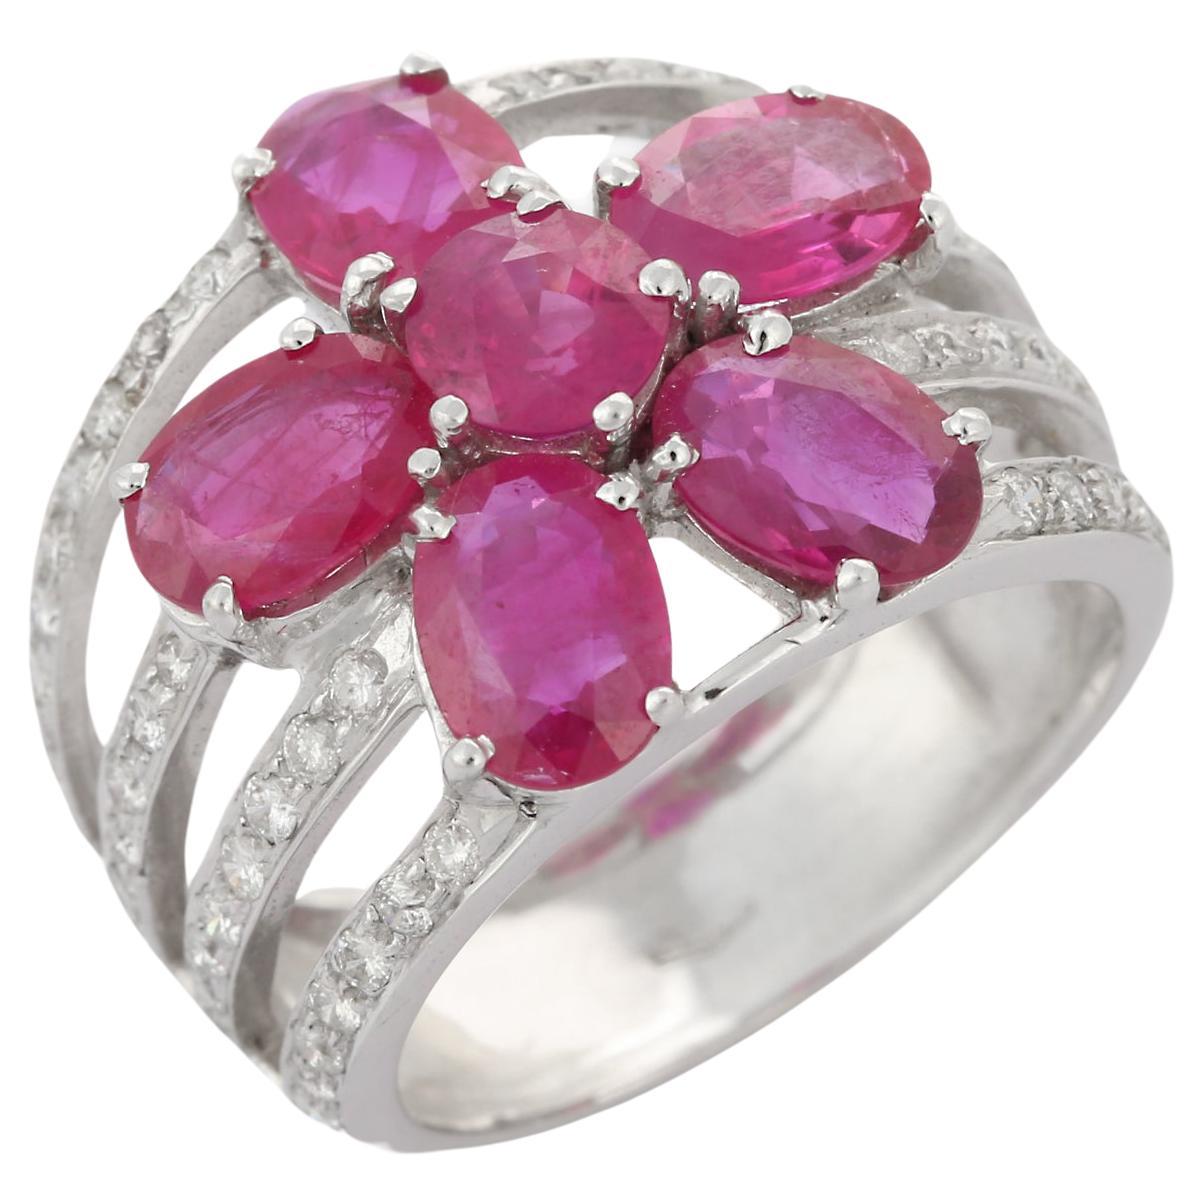 For Sale:  5.1 Ct Ruby Statement Flower Ring with Diamonds 18k Solid White Gold